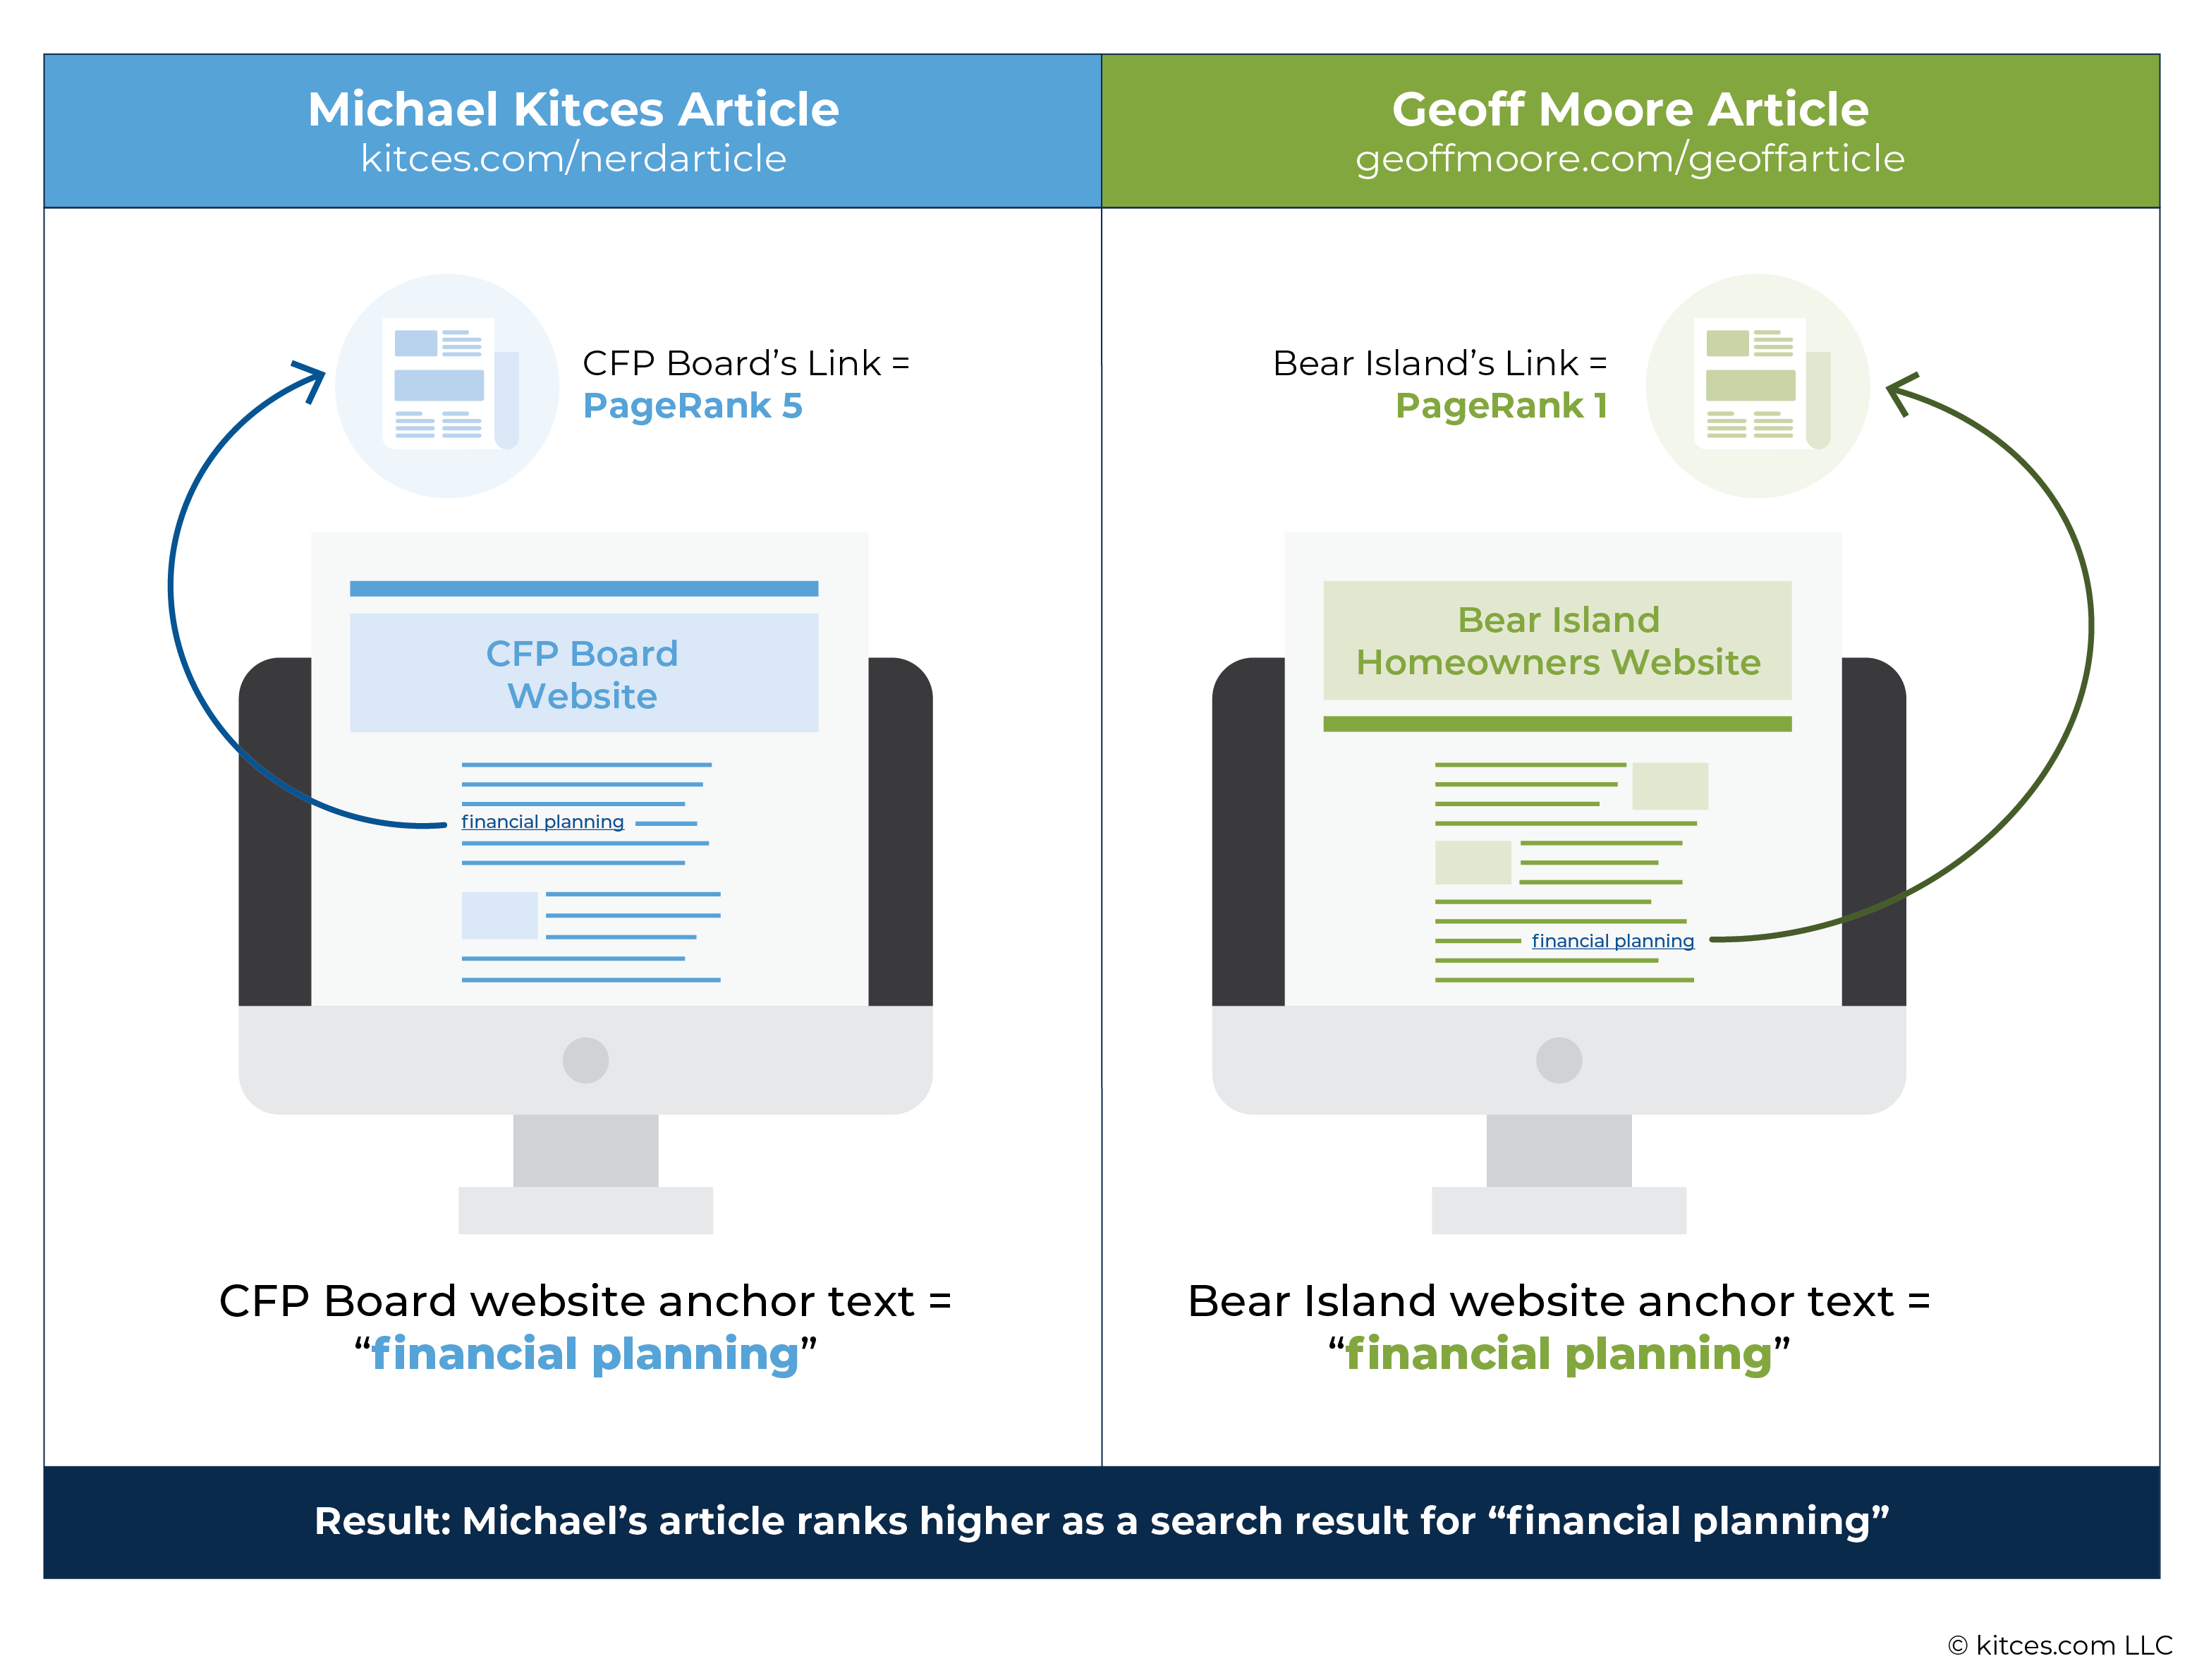 Website Article Ranking Based On Website Anchor Text